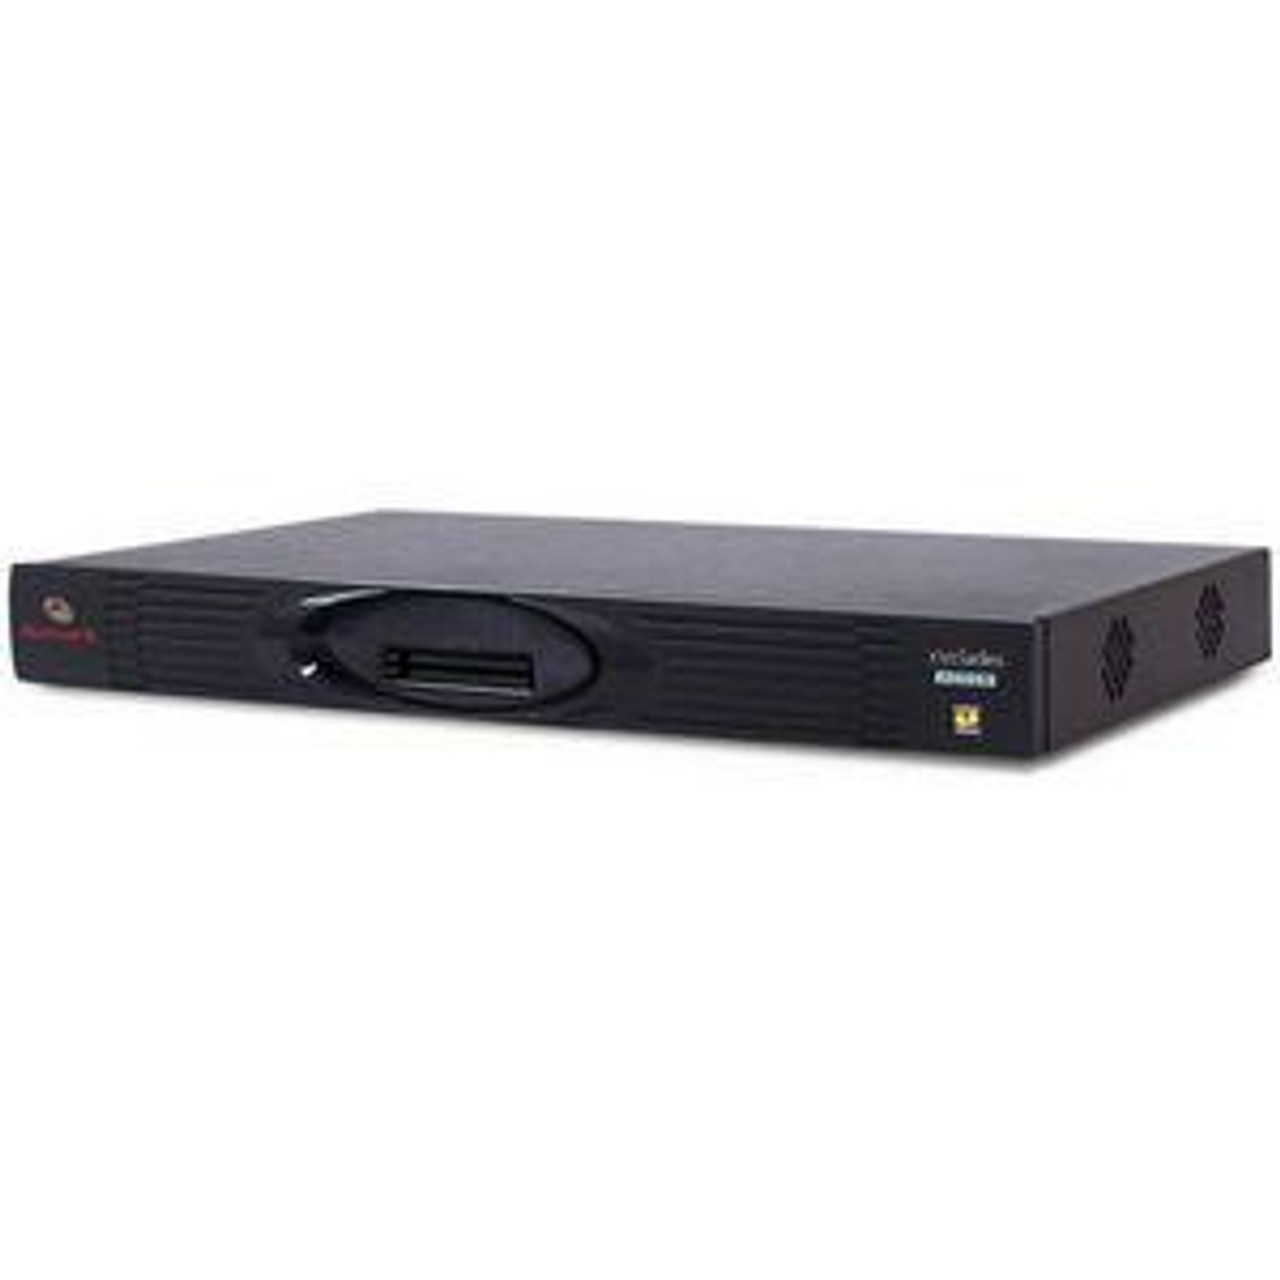 ATP0056 Avocent Cyclades 16-Ports Alterpath ACS-16 Console Server with Dual DC Power Supply